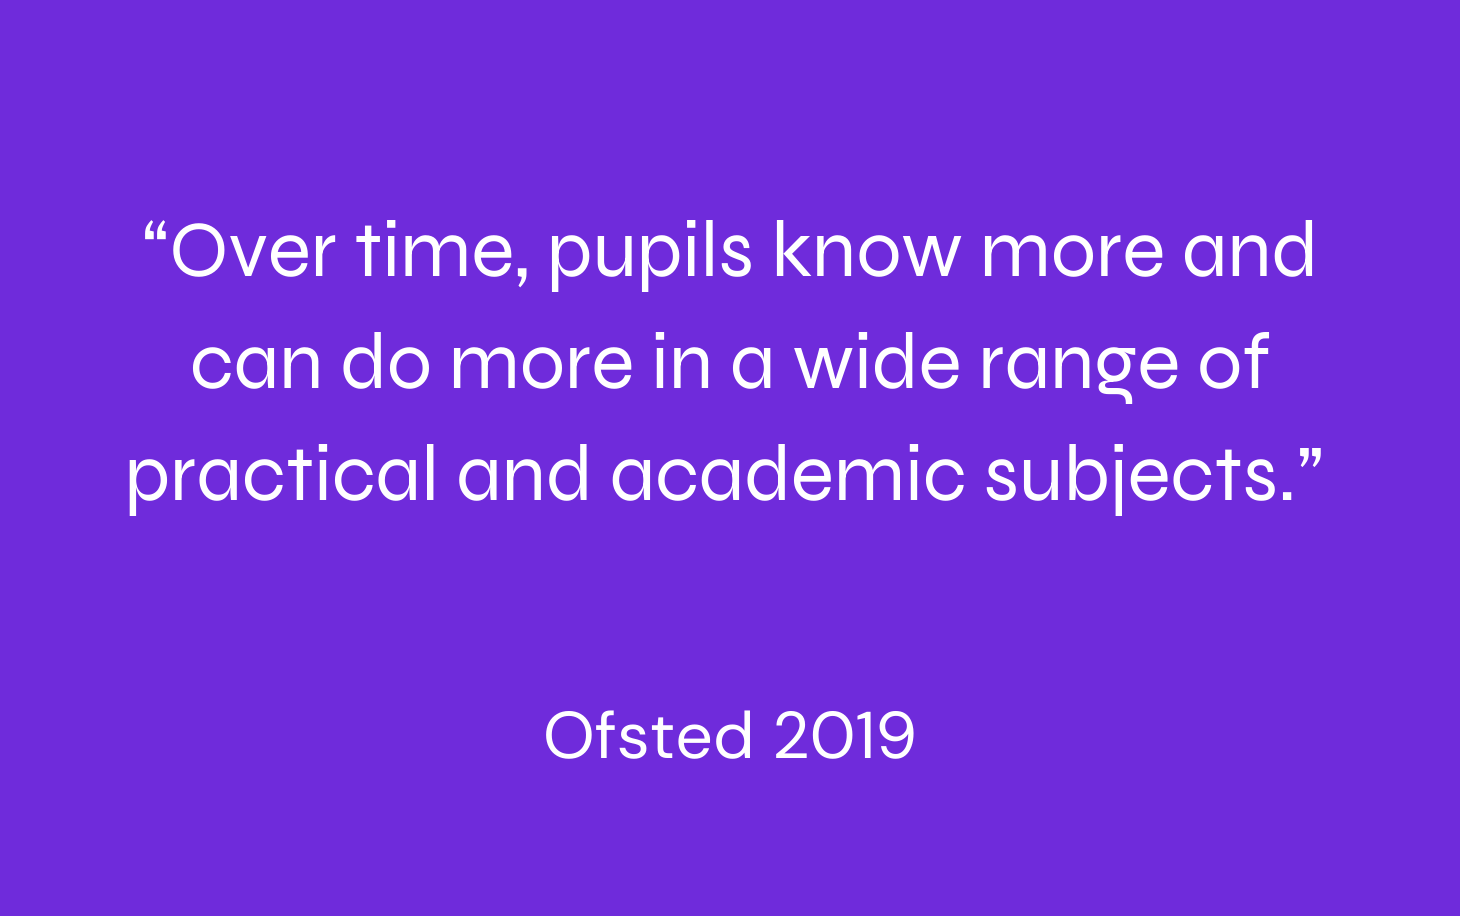 Over time pupils learn and achieve in practical and academic subjects